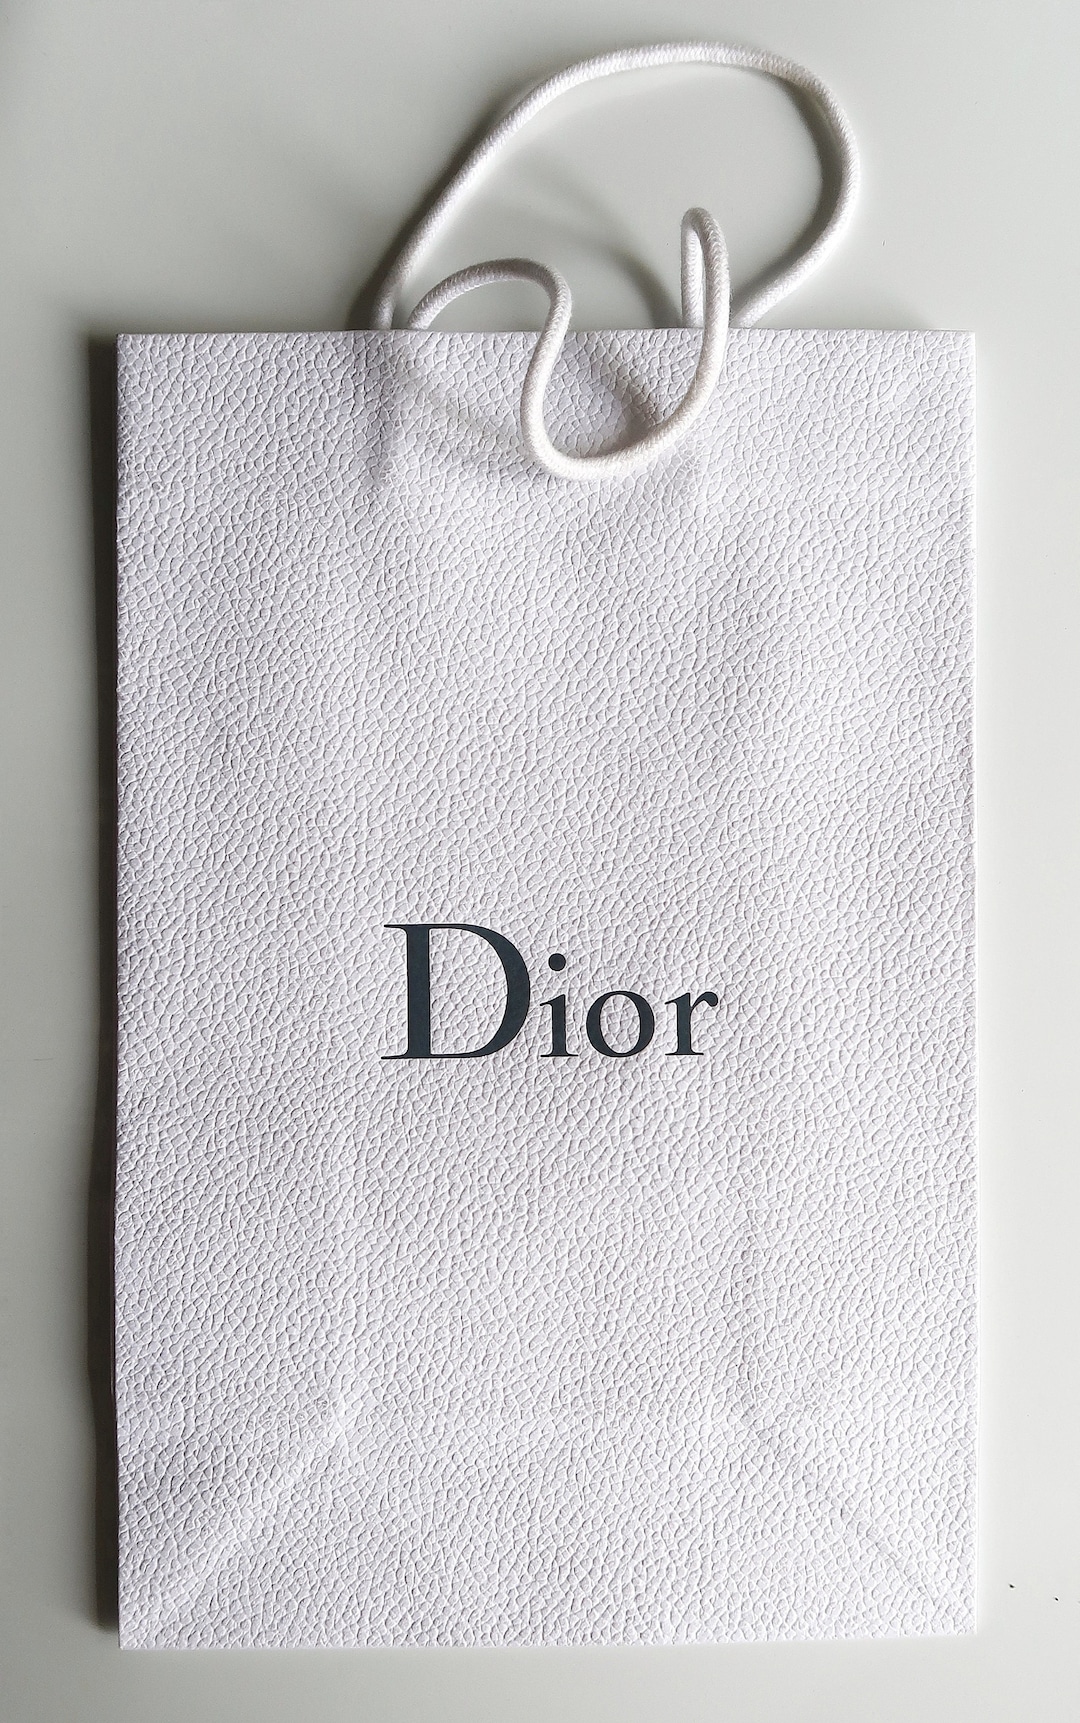 Dior Authentic Logo Stars Gift Wrapping Paper Approx 6 Ft. 27.5” Wide White  Gold